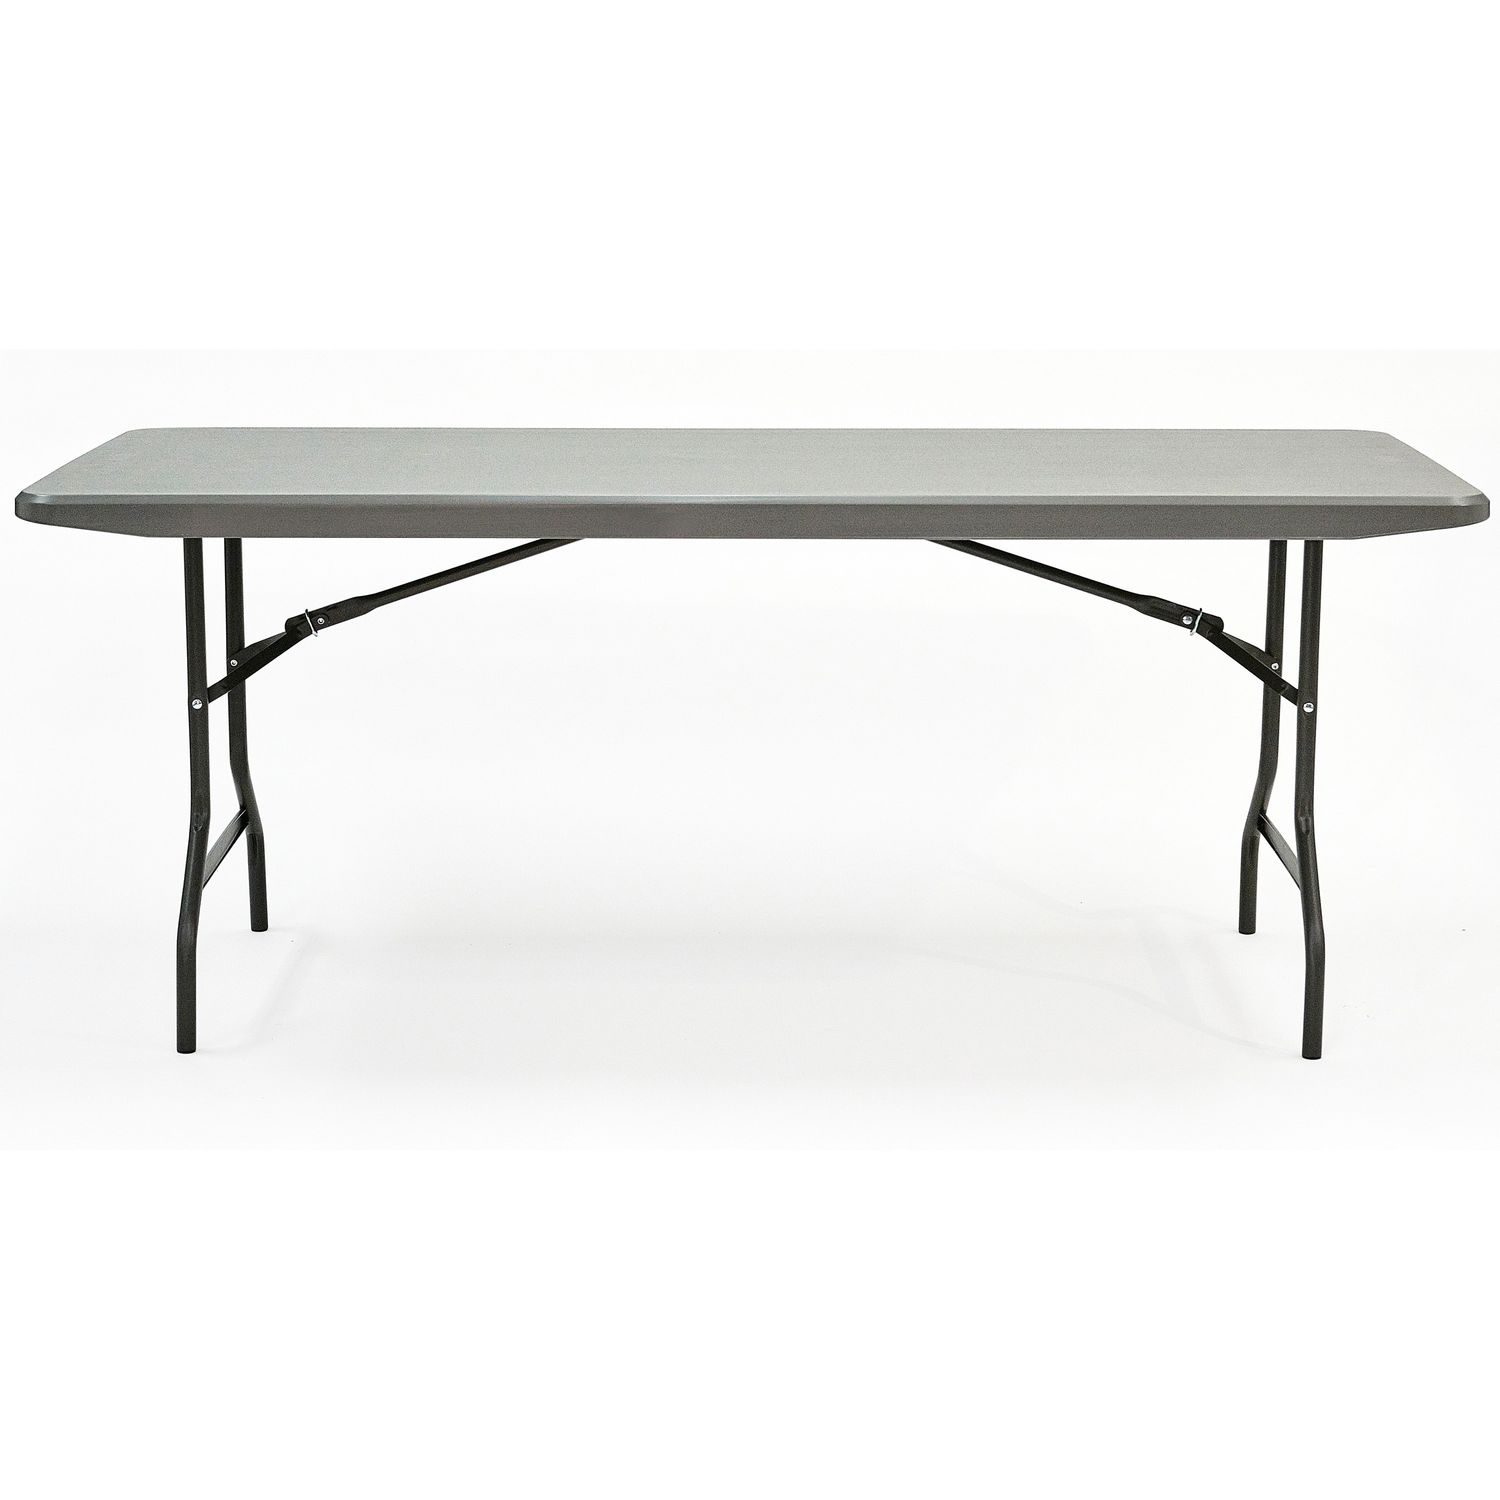 IndestrucTable Commercial Folding Table Charcoal Rectangle Top, Powder Coated Gray Round Leg Base, 72" Table Top Length x 30" Table Top Width x 2" Table Top Thickness